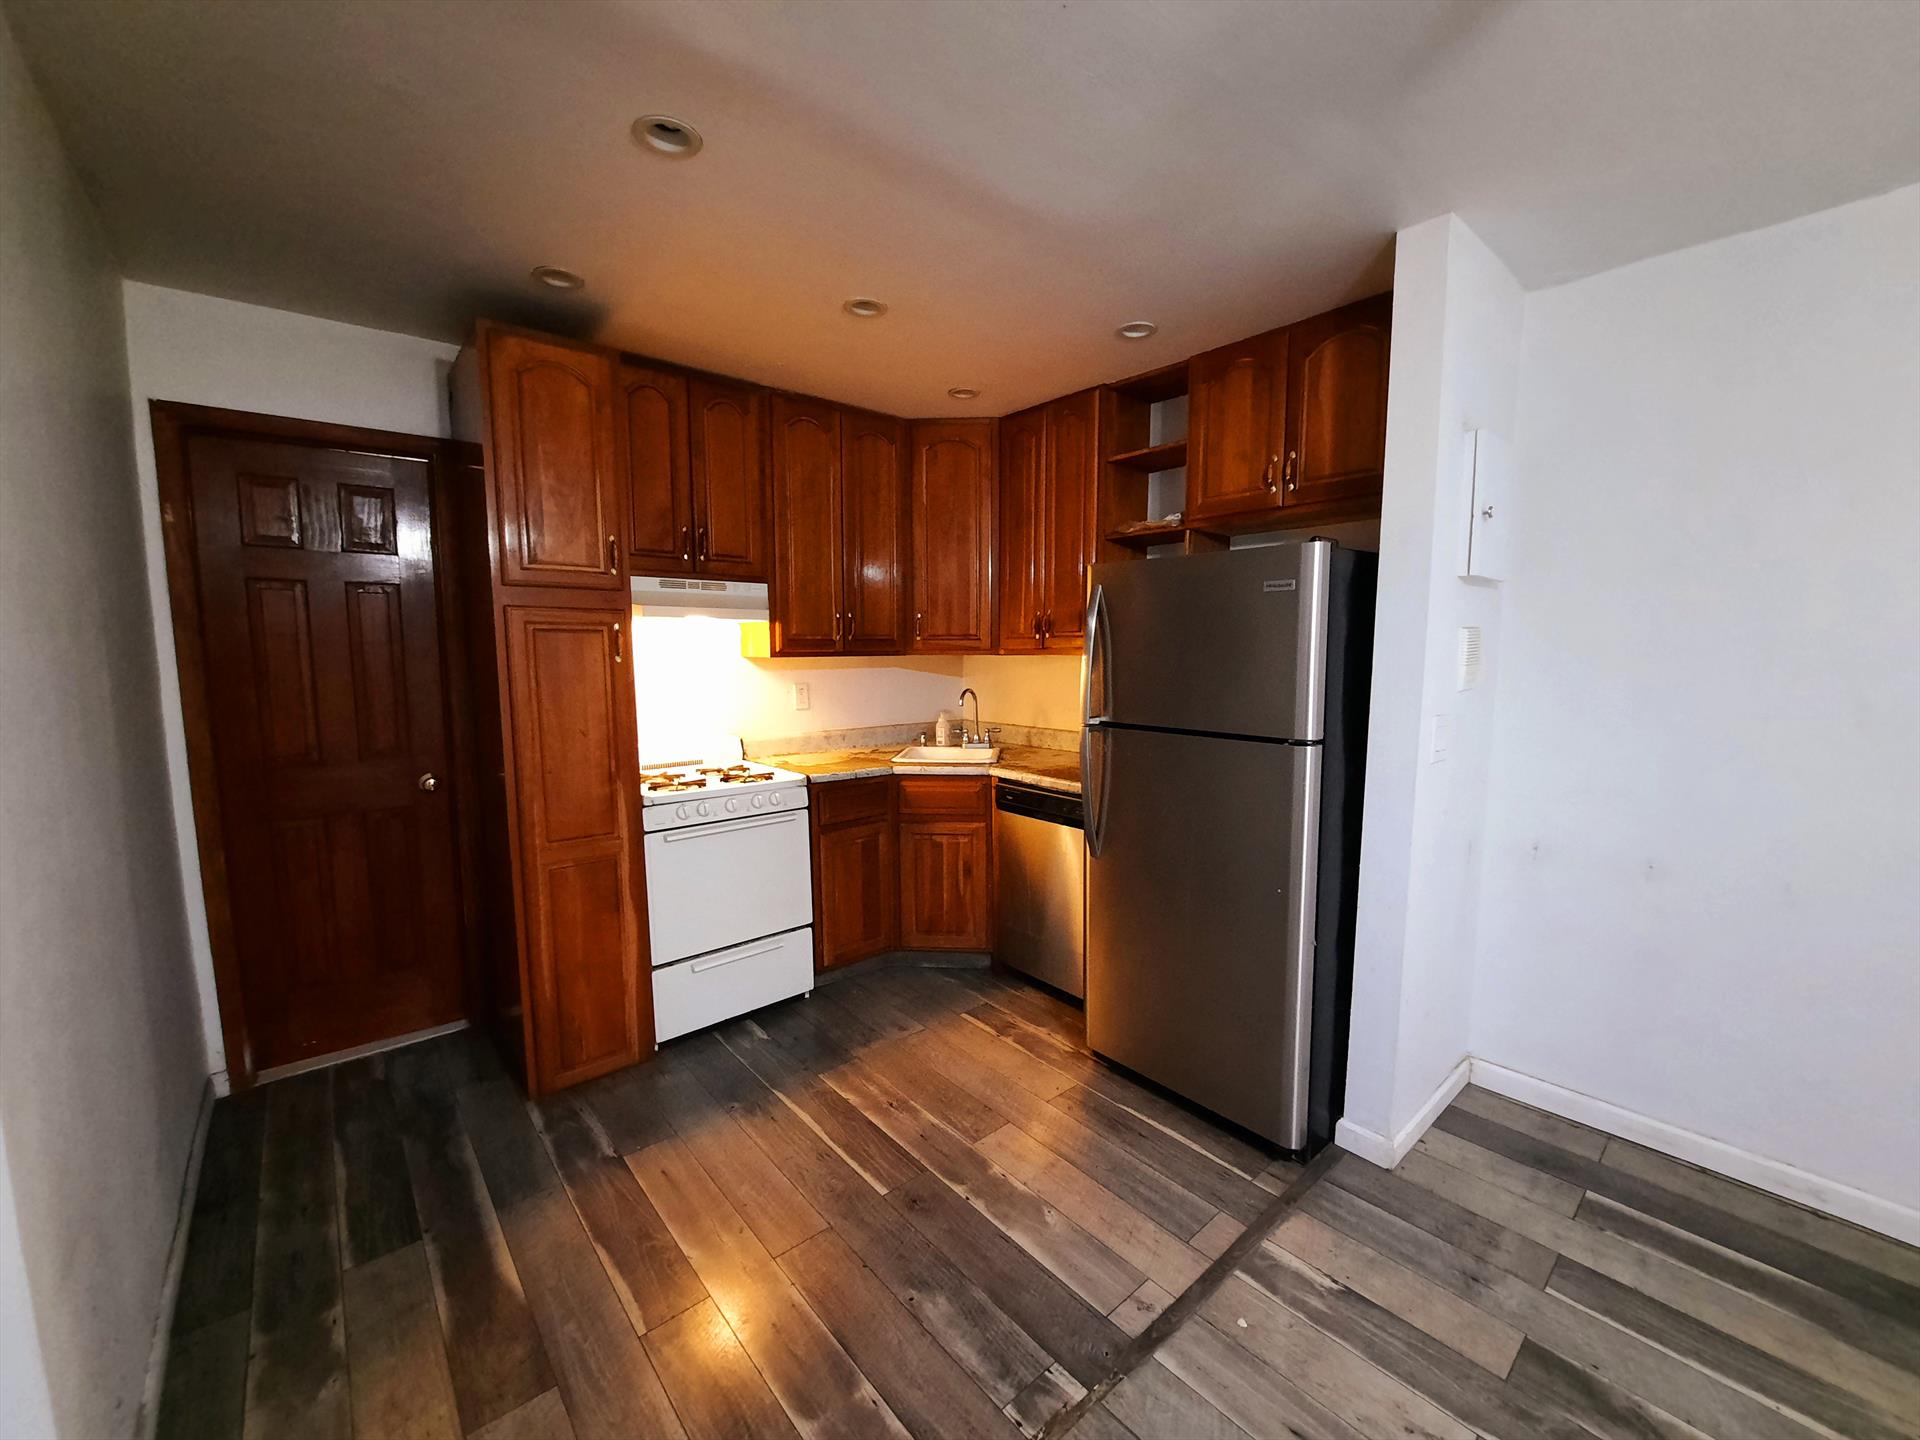 Move into this lovely Union City 2 BR condo rental located right outside of the Lincoln Tunnel and Midtown Manhattan. Features: great natural light, kitchen with refrigerator, gas stove, and dishwasher, living room / dining area (16' x 11'), 2 bedrooms with closets BR 1: 12.6' x 11' and BR 2: 10' x 9'), full bathroom with tub, laundry room, heat and hot water included!, well maintained condo building, 1 outdoor parking space is available for $150 per month, close to shopping, restaurants, parks, New York bound public transportation, tunnels, and highways. NO PETS! AVAILABLE APRIL 1st. To make this apartment yours: $1975 (1st months rent), $2963 (security deposit), $1975 (broker fee), $200 (move in fee / no move out fee), $65 (credit check per adult).Call Victor Alicea (Liberty Realty) at 917-617-9906 (m), or 201-610-1010 ext. 321 (o), if I am not available one of my colleagues will gladly assist you. Great credit and rental history is a must!  Se habla espanol. 